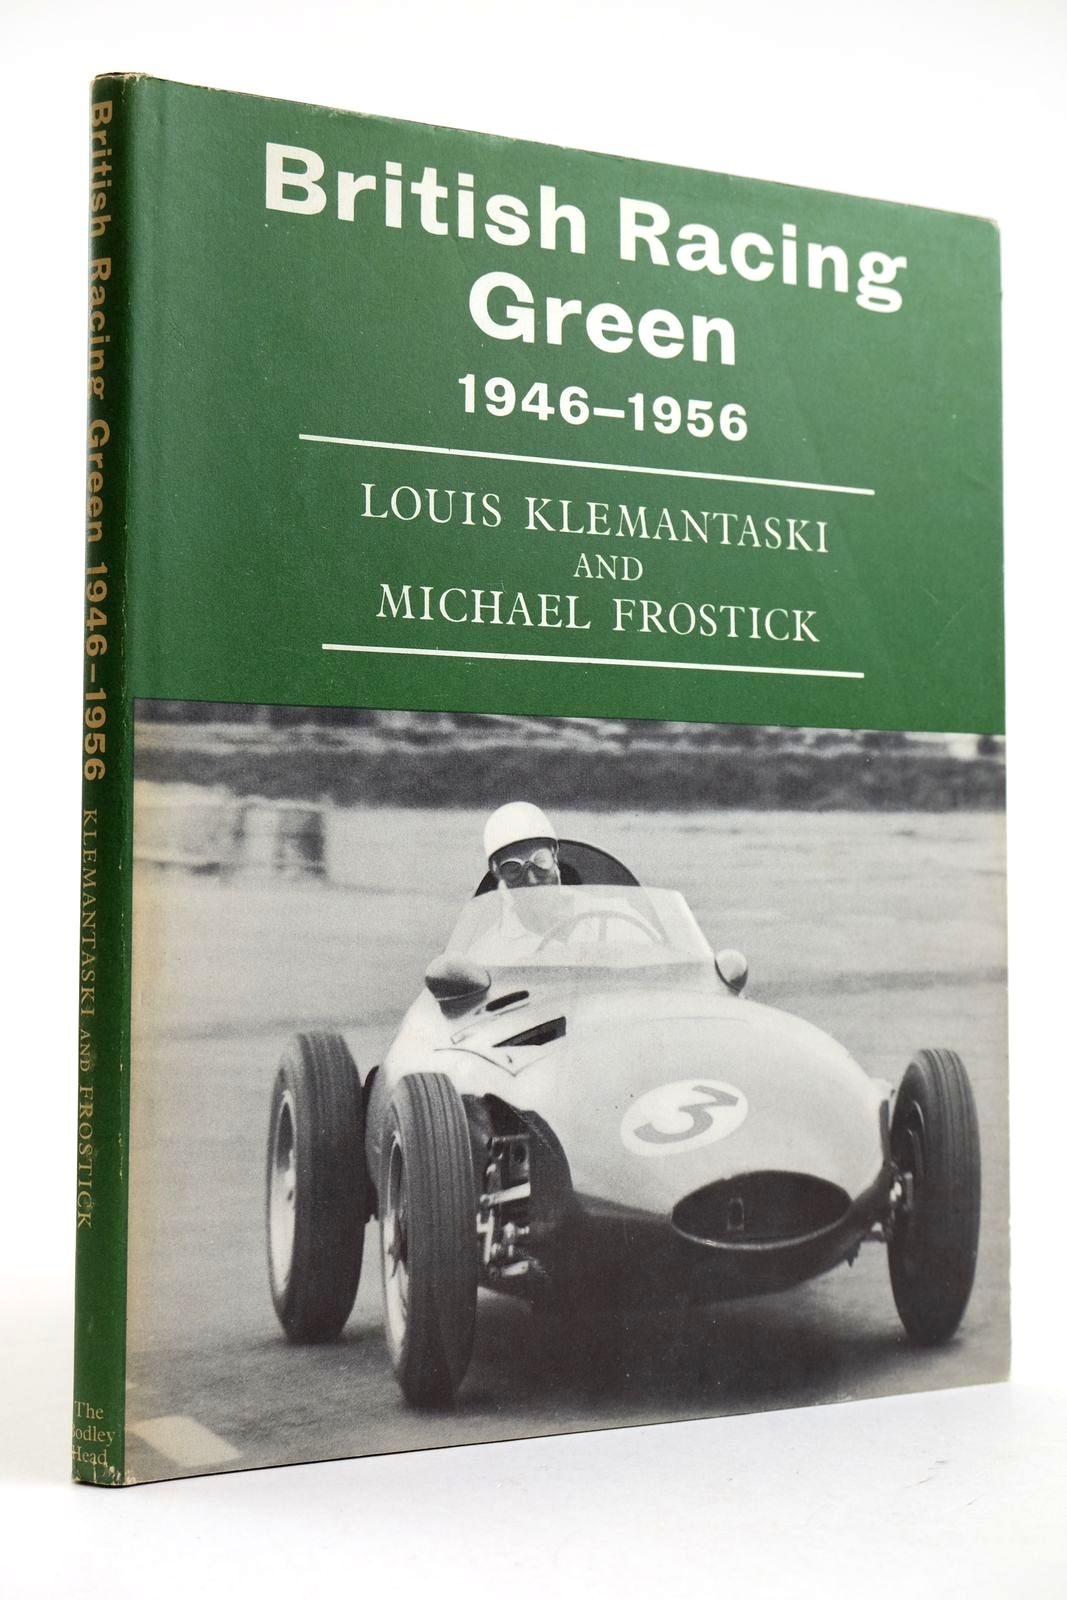 Photo of BRITISH RACING GREEN 1946-1956 written by Klemantaski, Louis Frostick, Michael published by The Bodley Head (STOCK CODE: 2132729)  for sale by Stella & Rose's Books